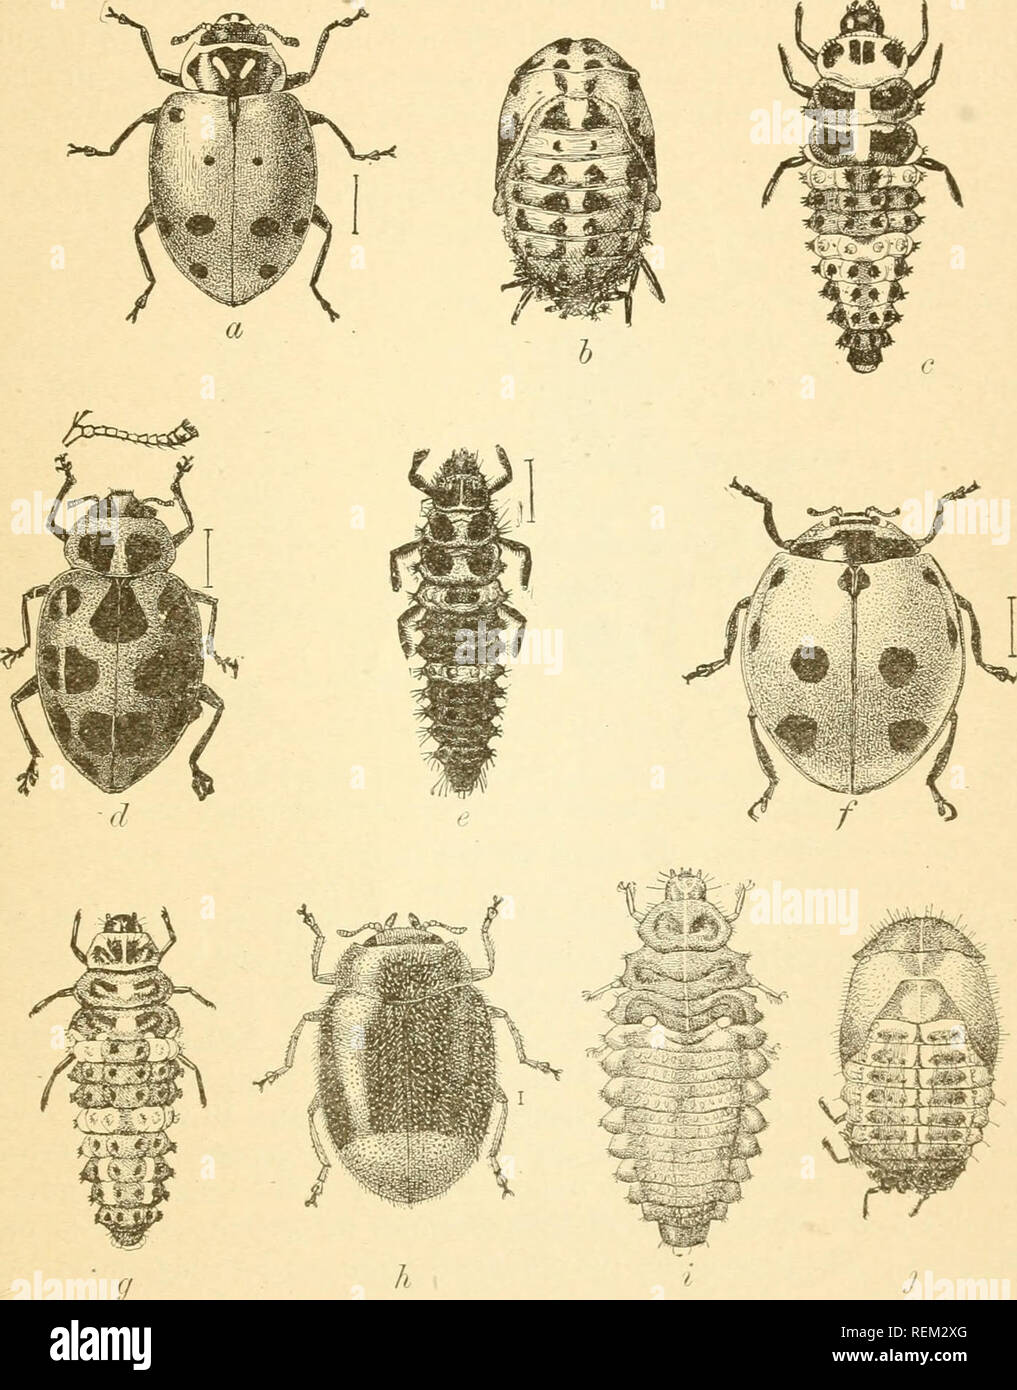 . Circular. Insect pests; Insect pests. quently mistaken for the parent of the aphides. Another very efficient enemy, the nine-spotted ladybird, is shown in figure 3,,/, r/. One of the most abundant s^^rphus-fly enemies is illustrated by figure 4.. Fig. d.—a, Adult of convergent ladybird {Hippodamia convergens); b, pupa of same; c, larva of same; d, adult of spotted ladybird {Megilla maculata); e, larva of same; /, adult of nine-spotted ladybird (Coccinclla 9-notata); g, larva o-f same; h, adult of Scymnus terminatus; i, larva of same; J, pupa of same. All enlarged; size indicated by hair line Stock Photo